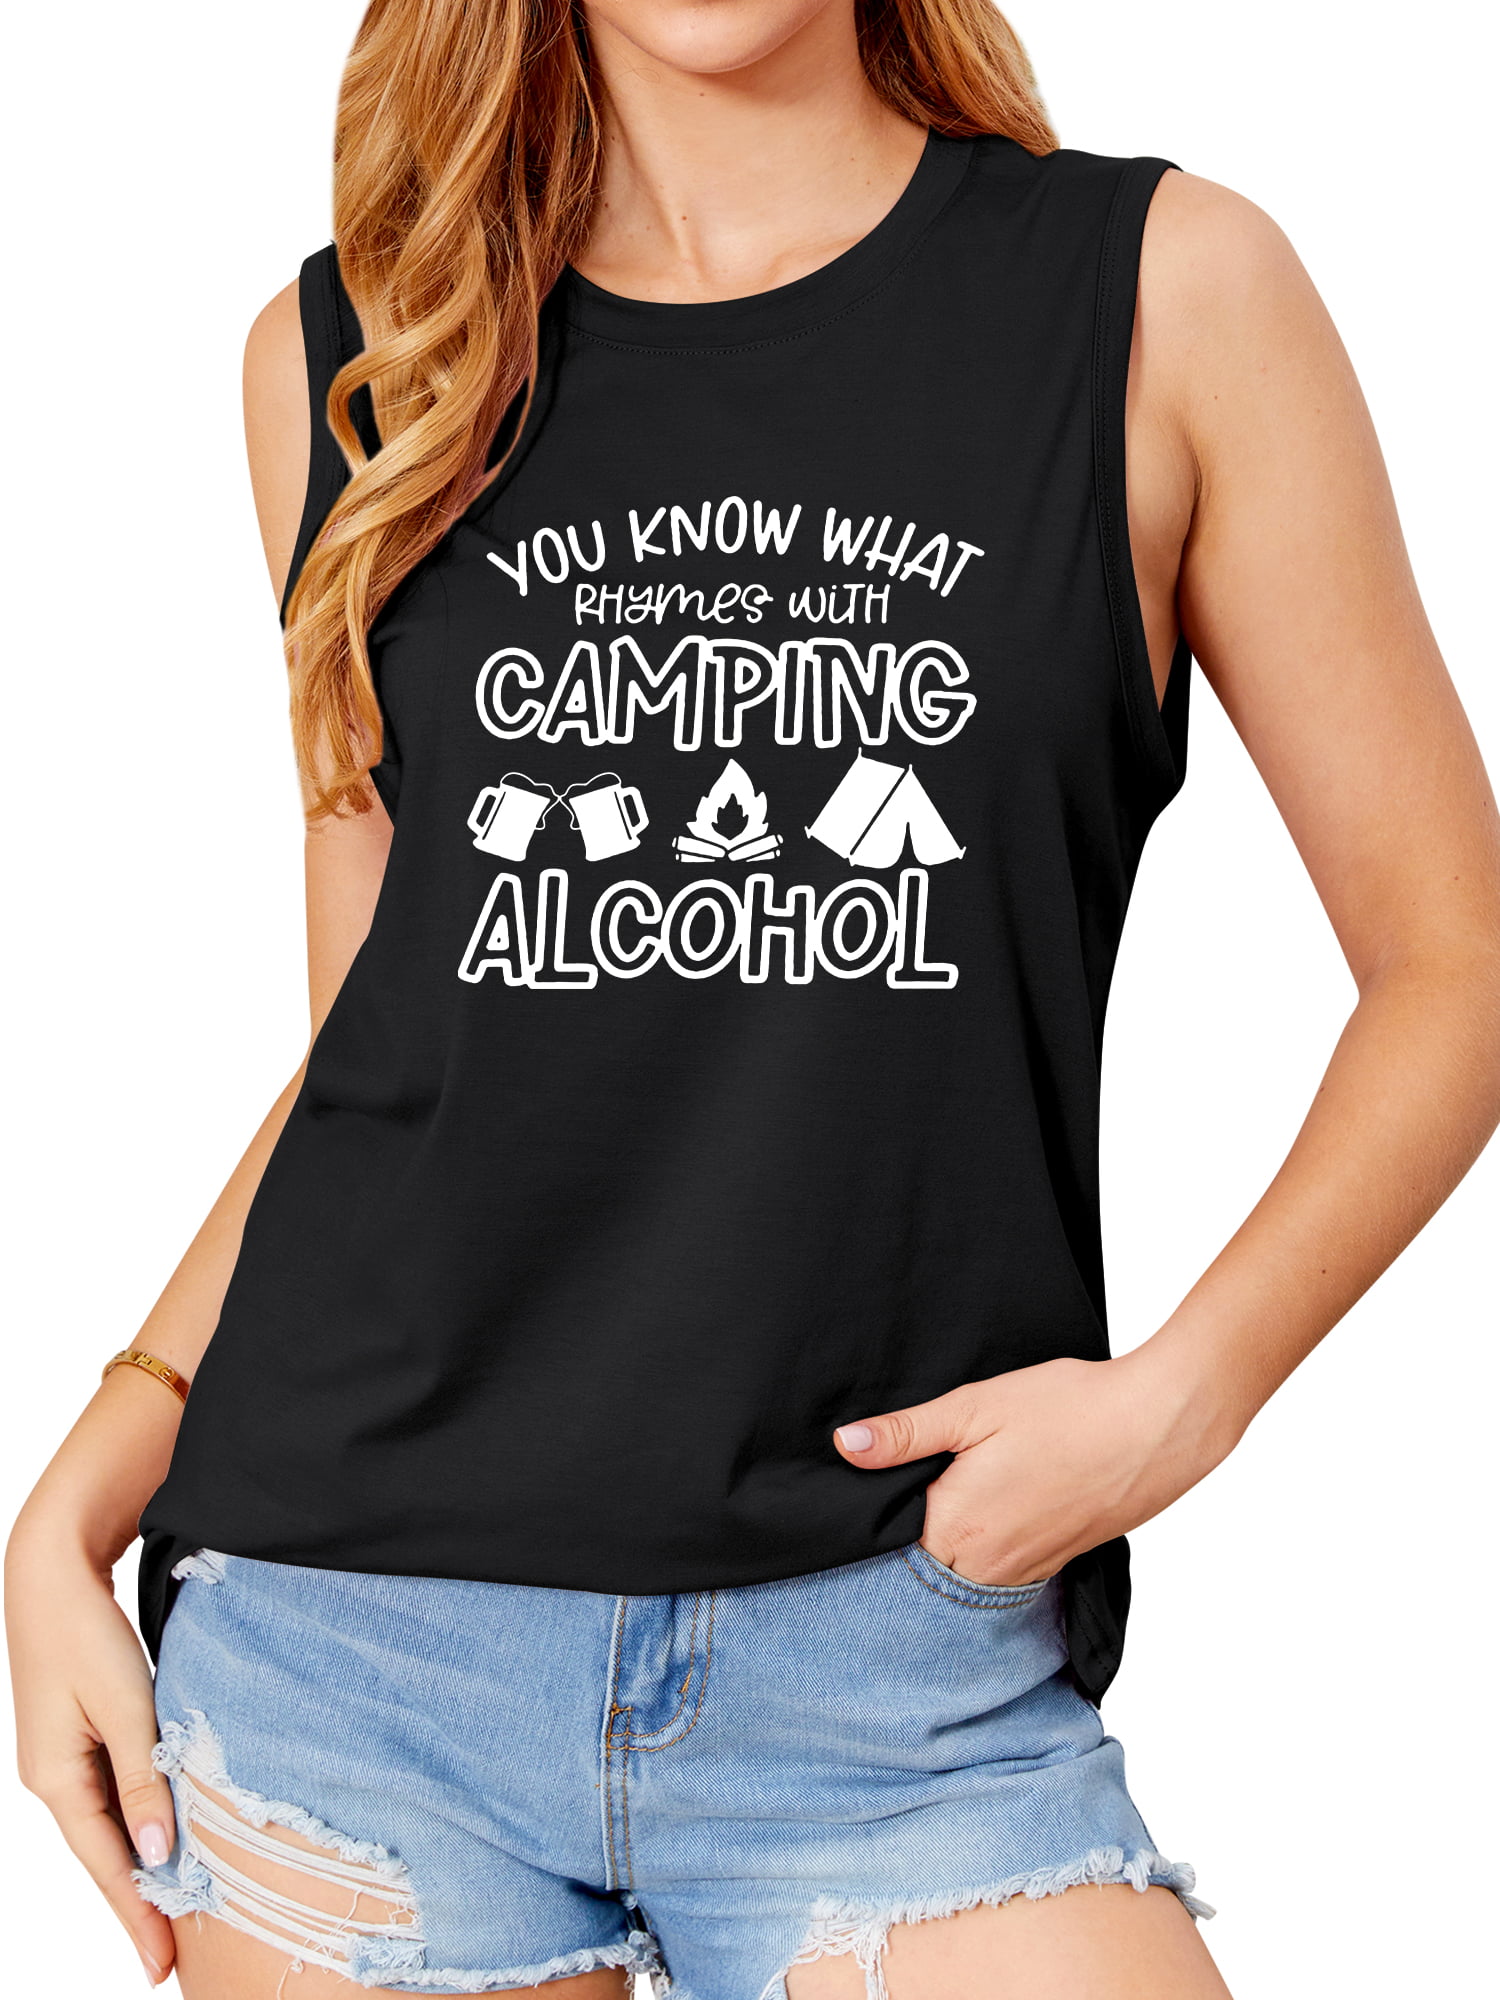 QAFOPEH Women You Know What With Camping Letter Print Crew Tank Top - Walmart.com